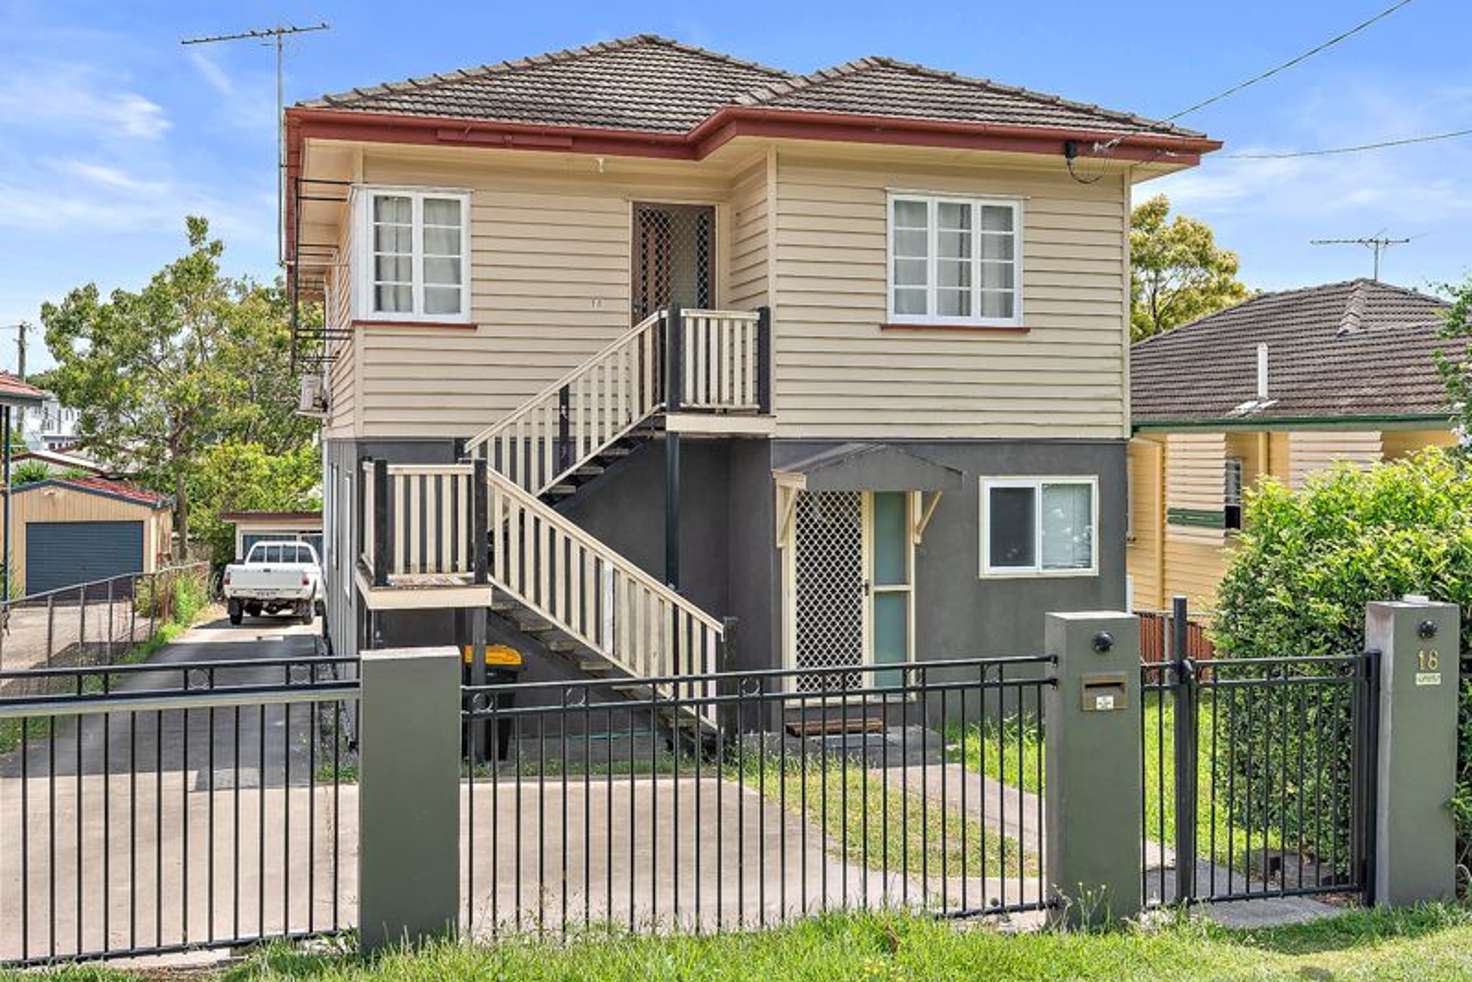 Main view of Homely house listing, 18 Lumley St, Upper Mount Gravatt QLD 4122